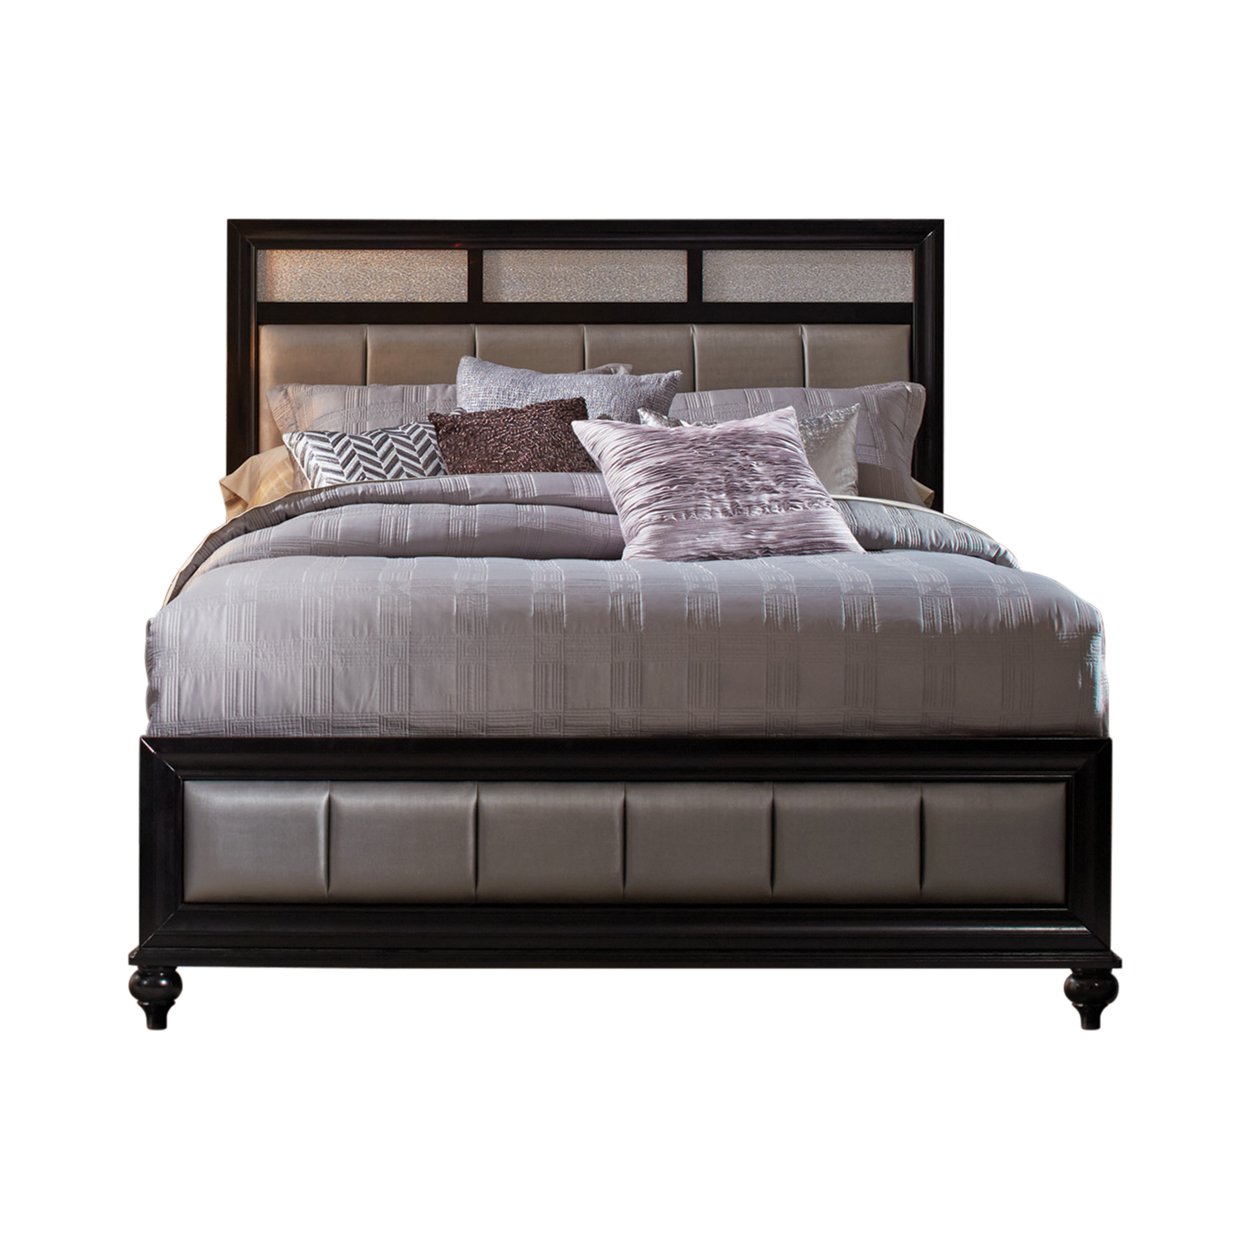 Leatherette Queen Size Bed With Crystal Inlay Headboard, Black And Gray- Saltoro Sherpi